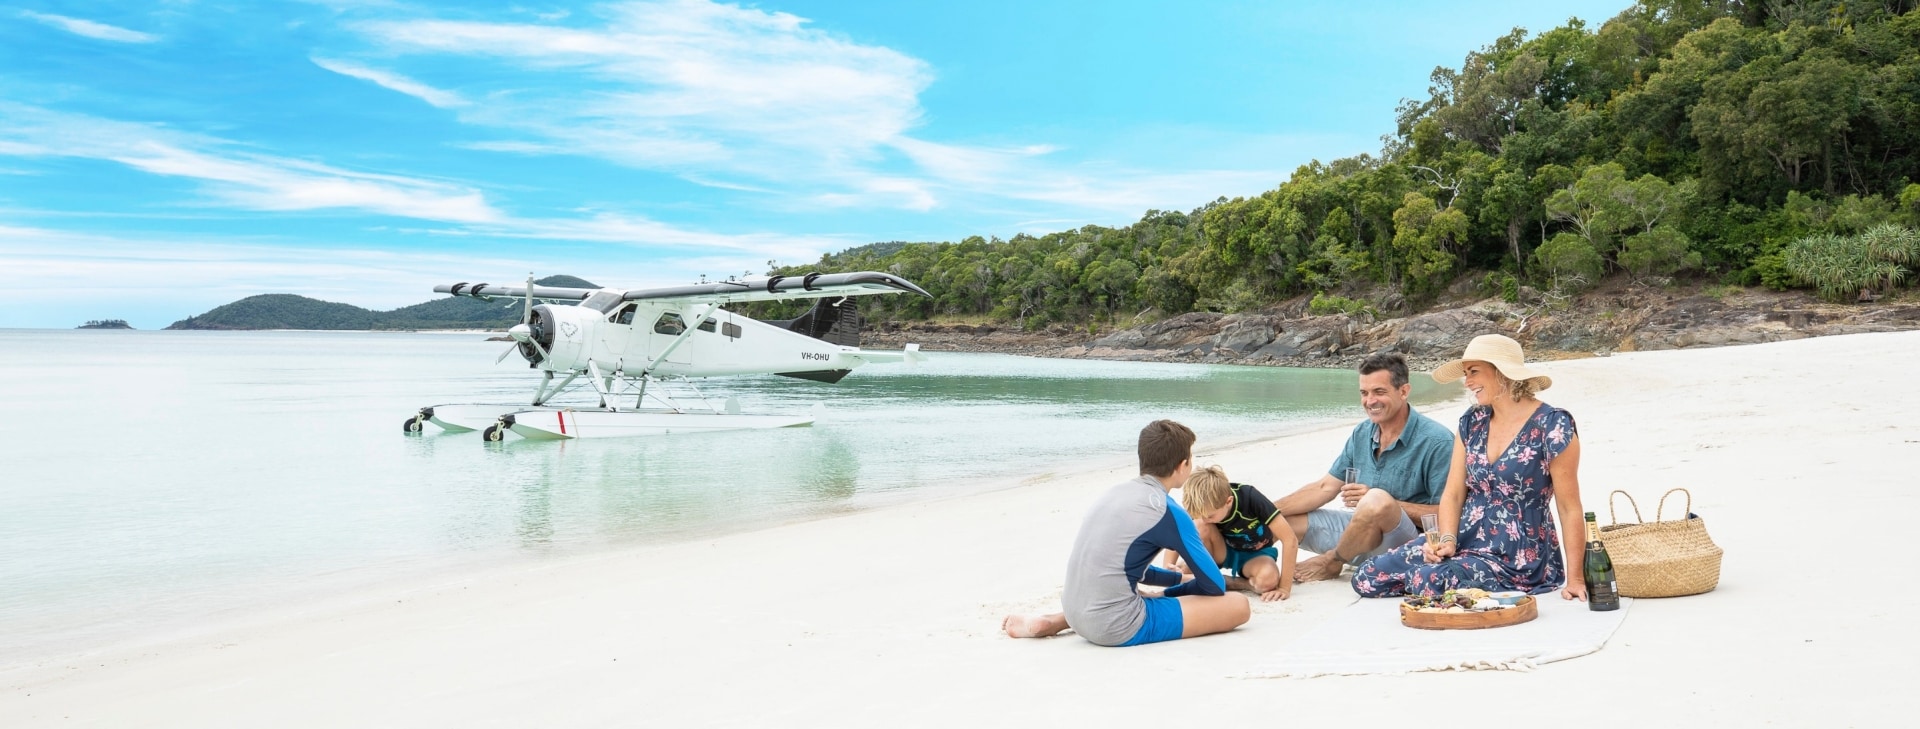 Whitehaven Beach, QLD © Tourism and Events Queensland